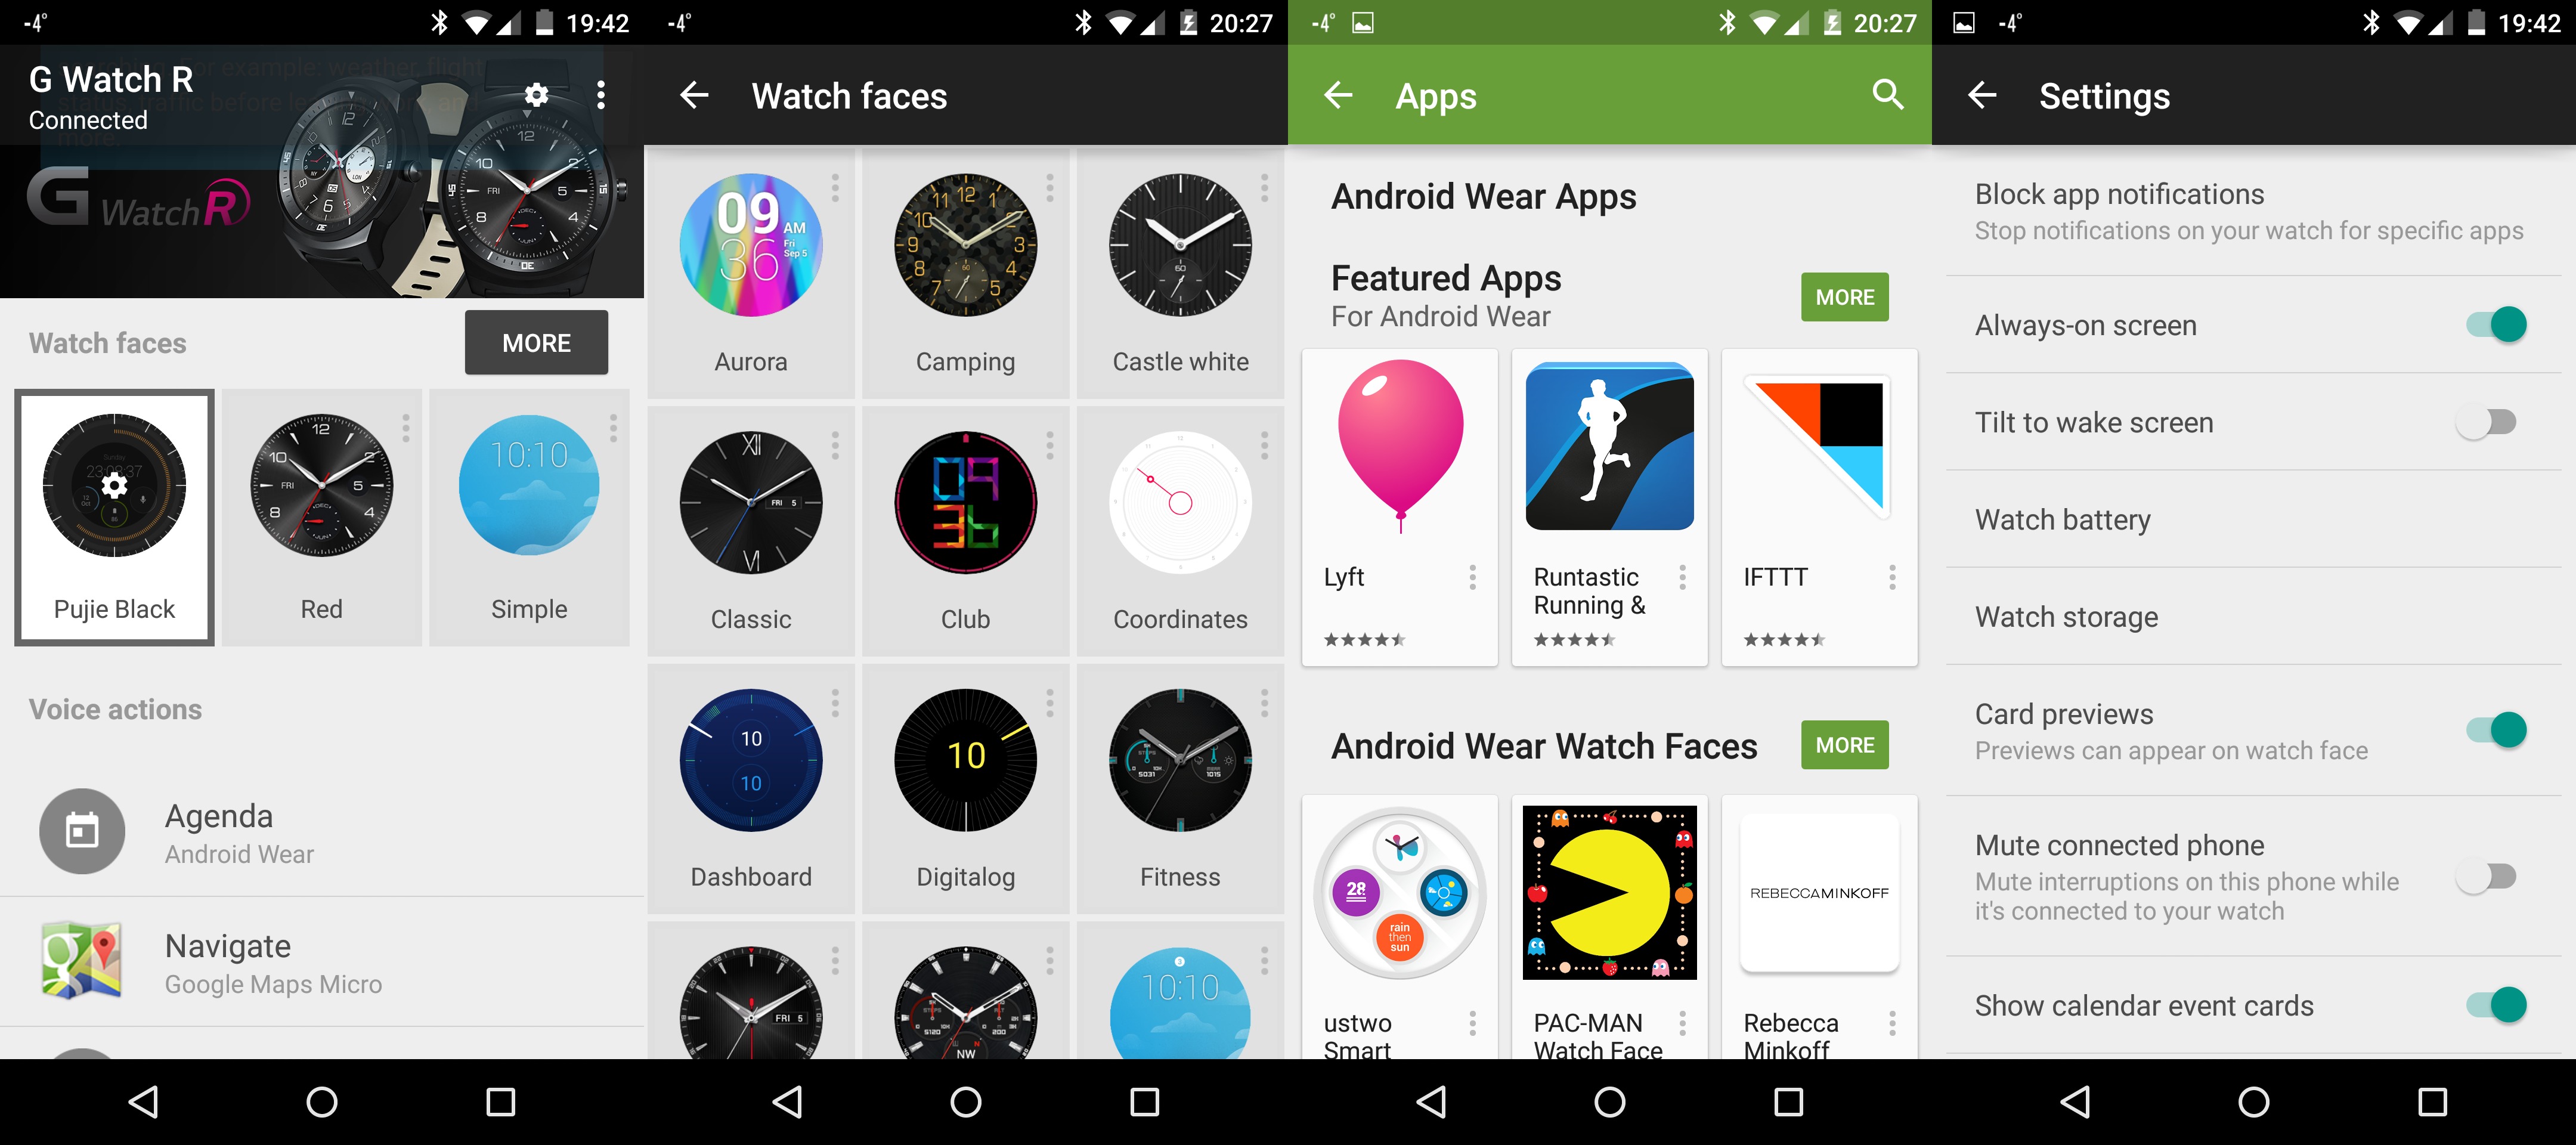 LG_G_watch_R_android_wear_settings